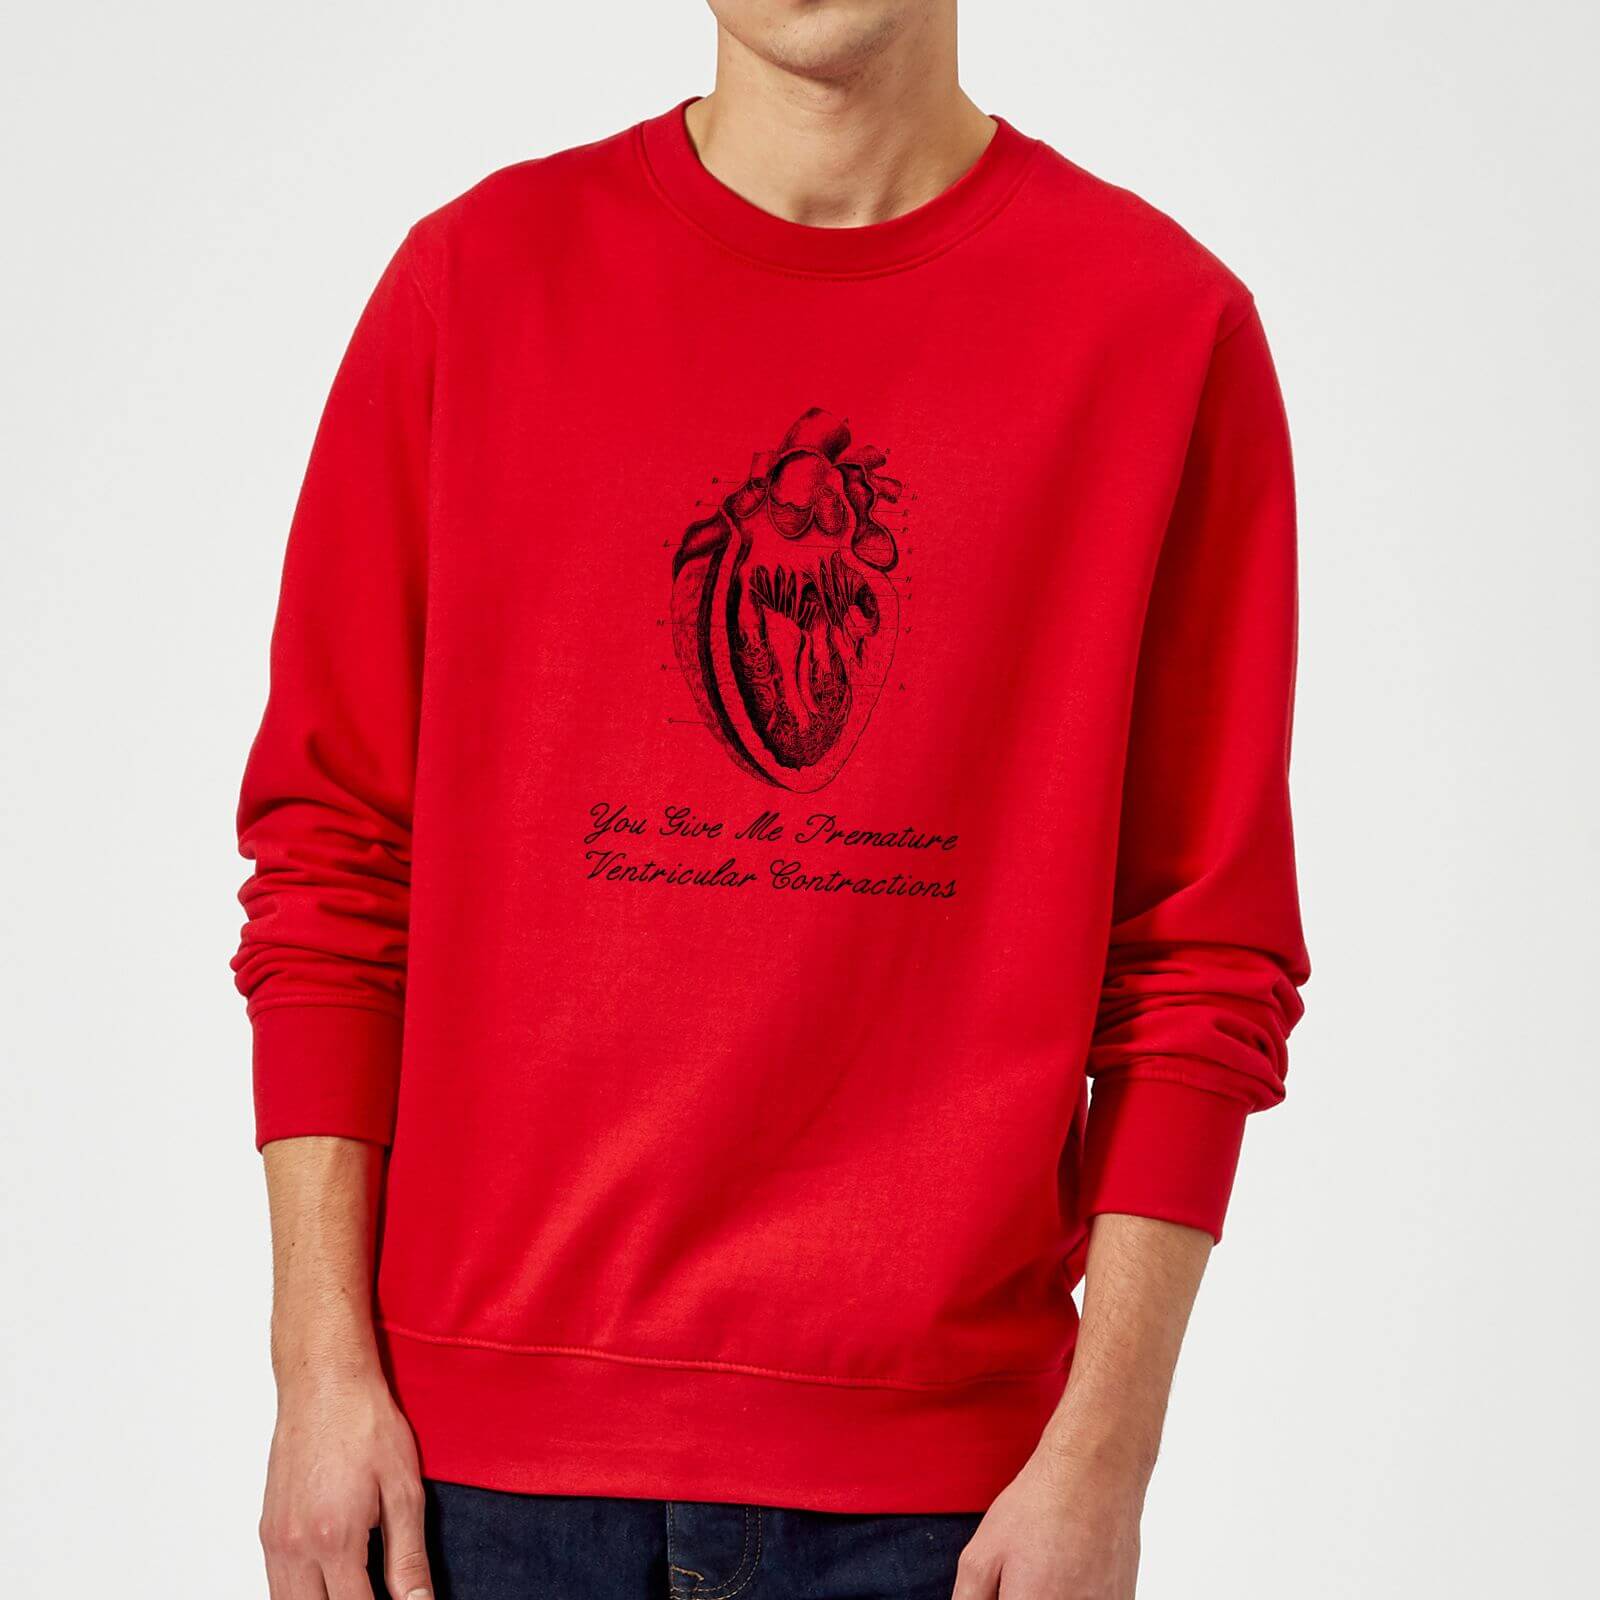 Premature Ventricular Contractions Sweatshirt - Red - M - Red